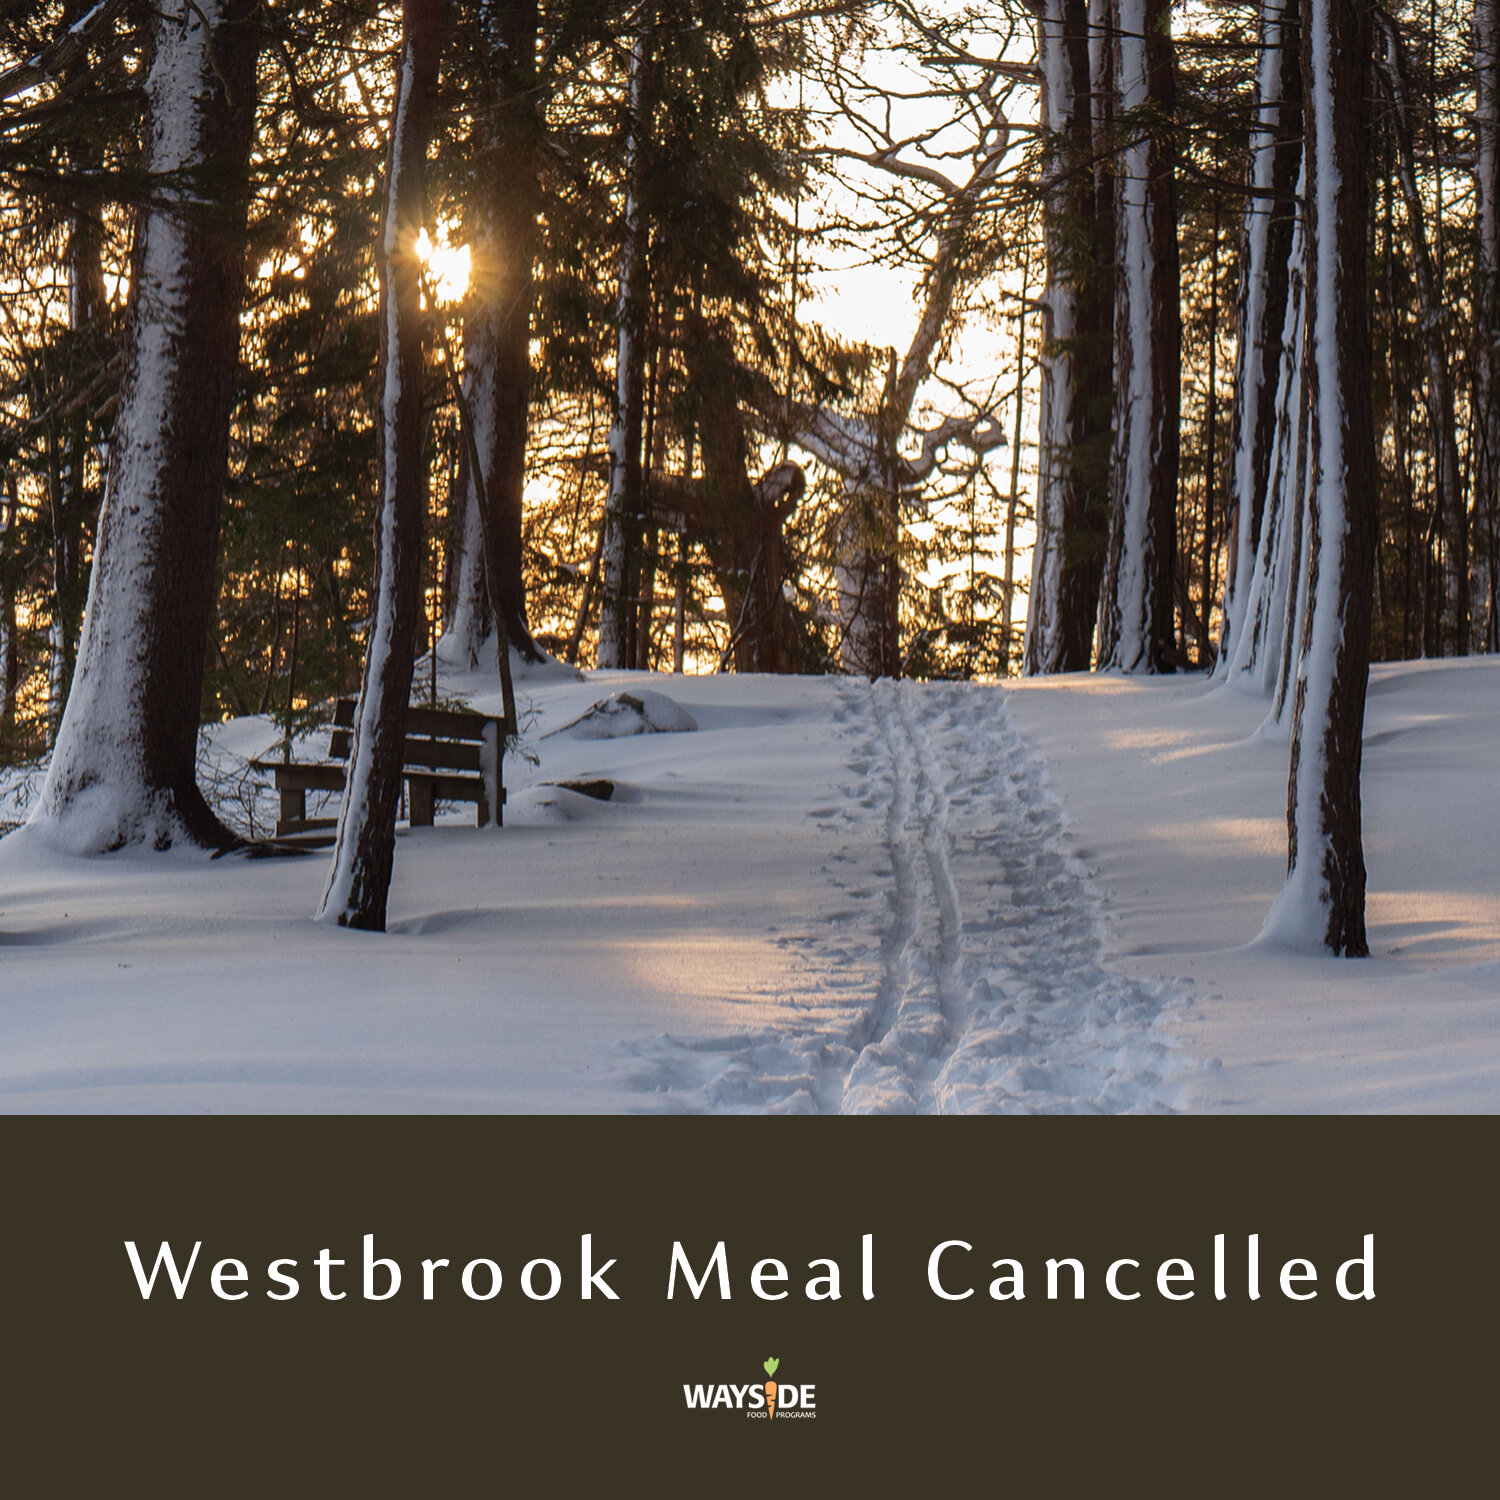 Due to the incoming nor'easter, our Wednesday evening community meal at Westbrook Community Center has been cancelled. Stay safe and warm out there!
.
.
#noreaster #communitymeals